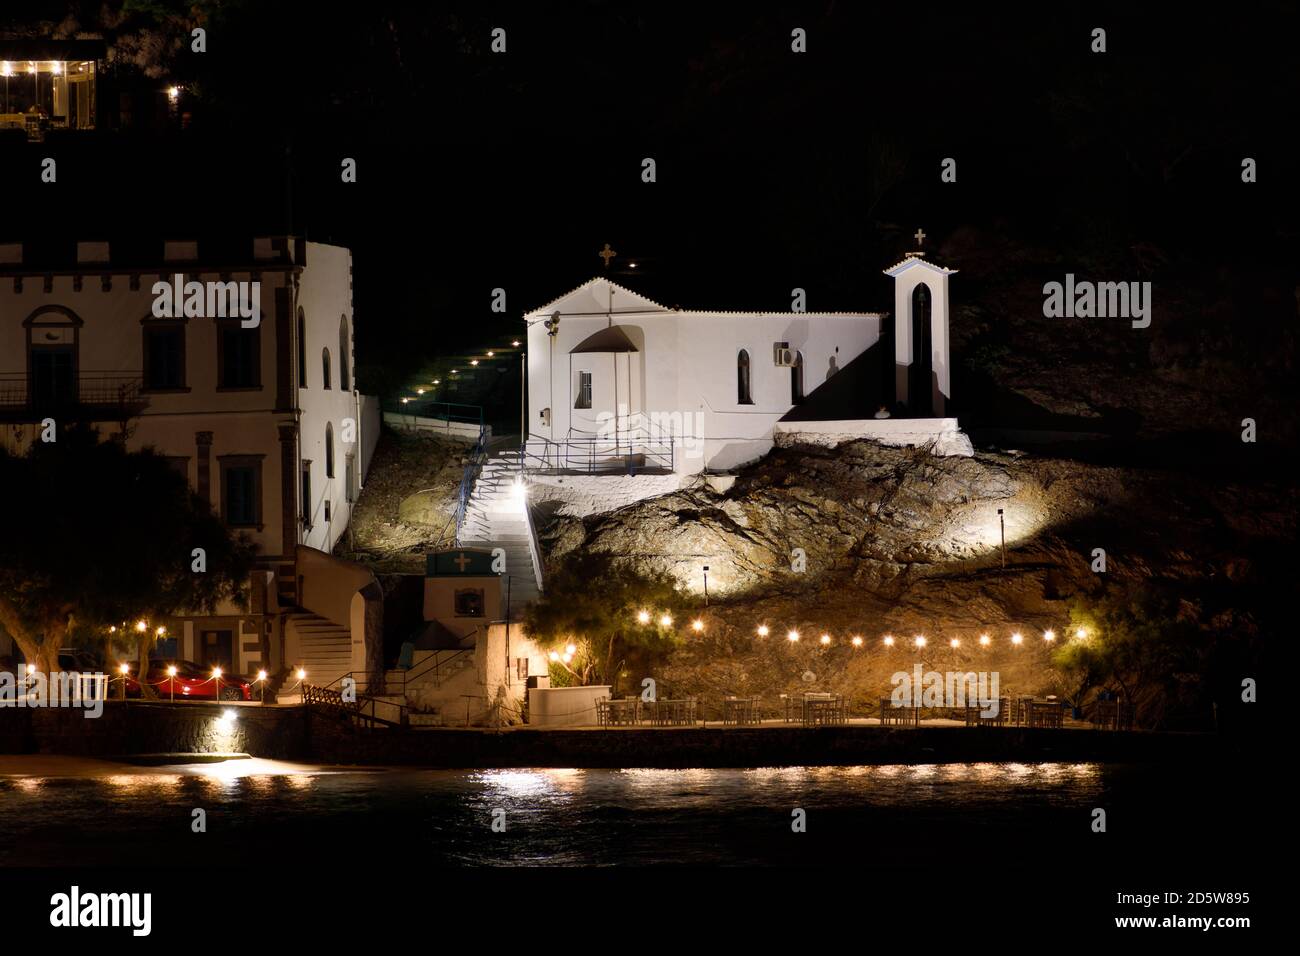 The church of Santa Paraskevi on the rock in front of the sea, with taverns and houses, on the island of Lemnos in Greece Stock Photo